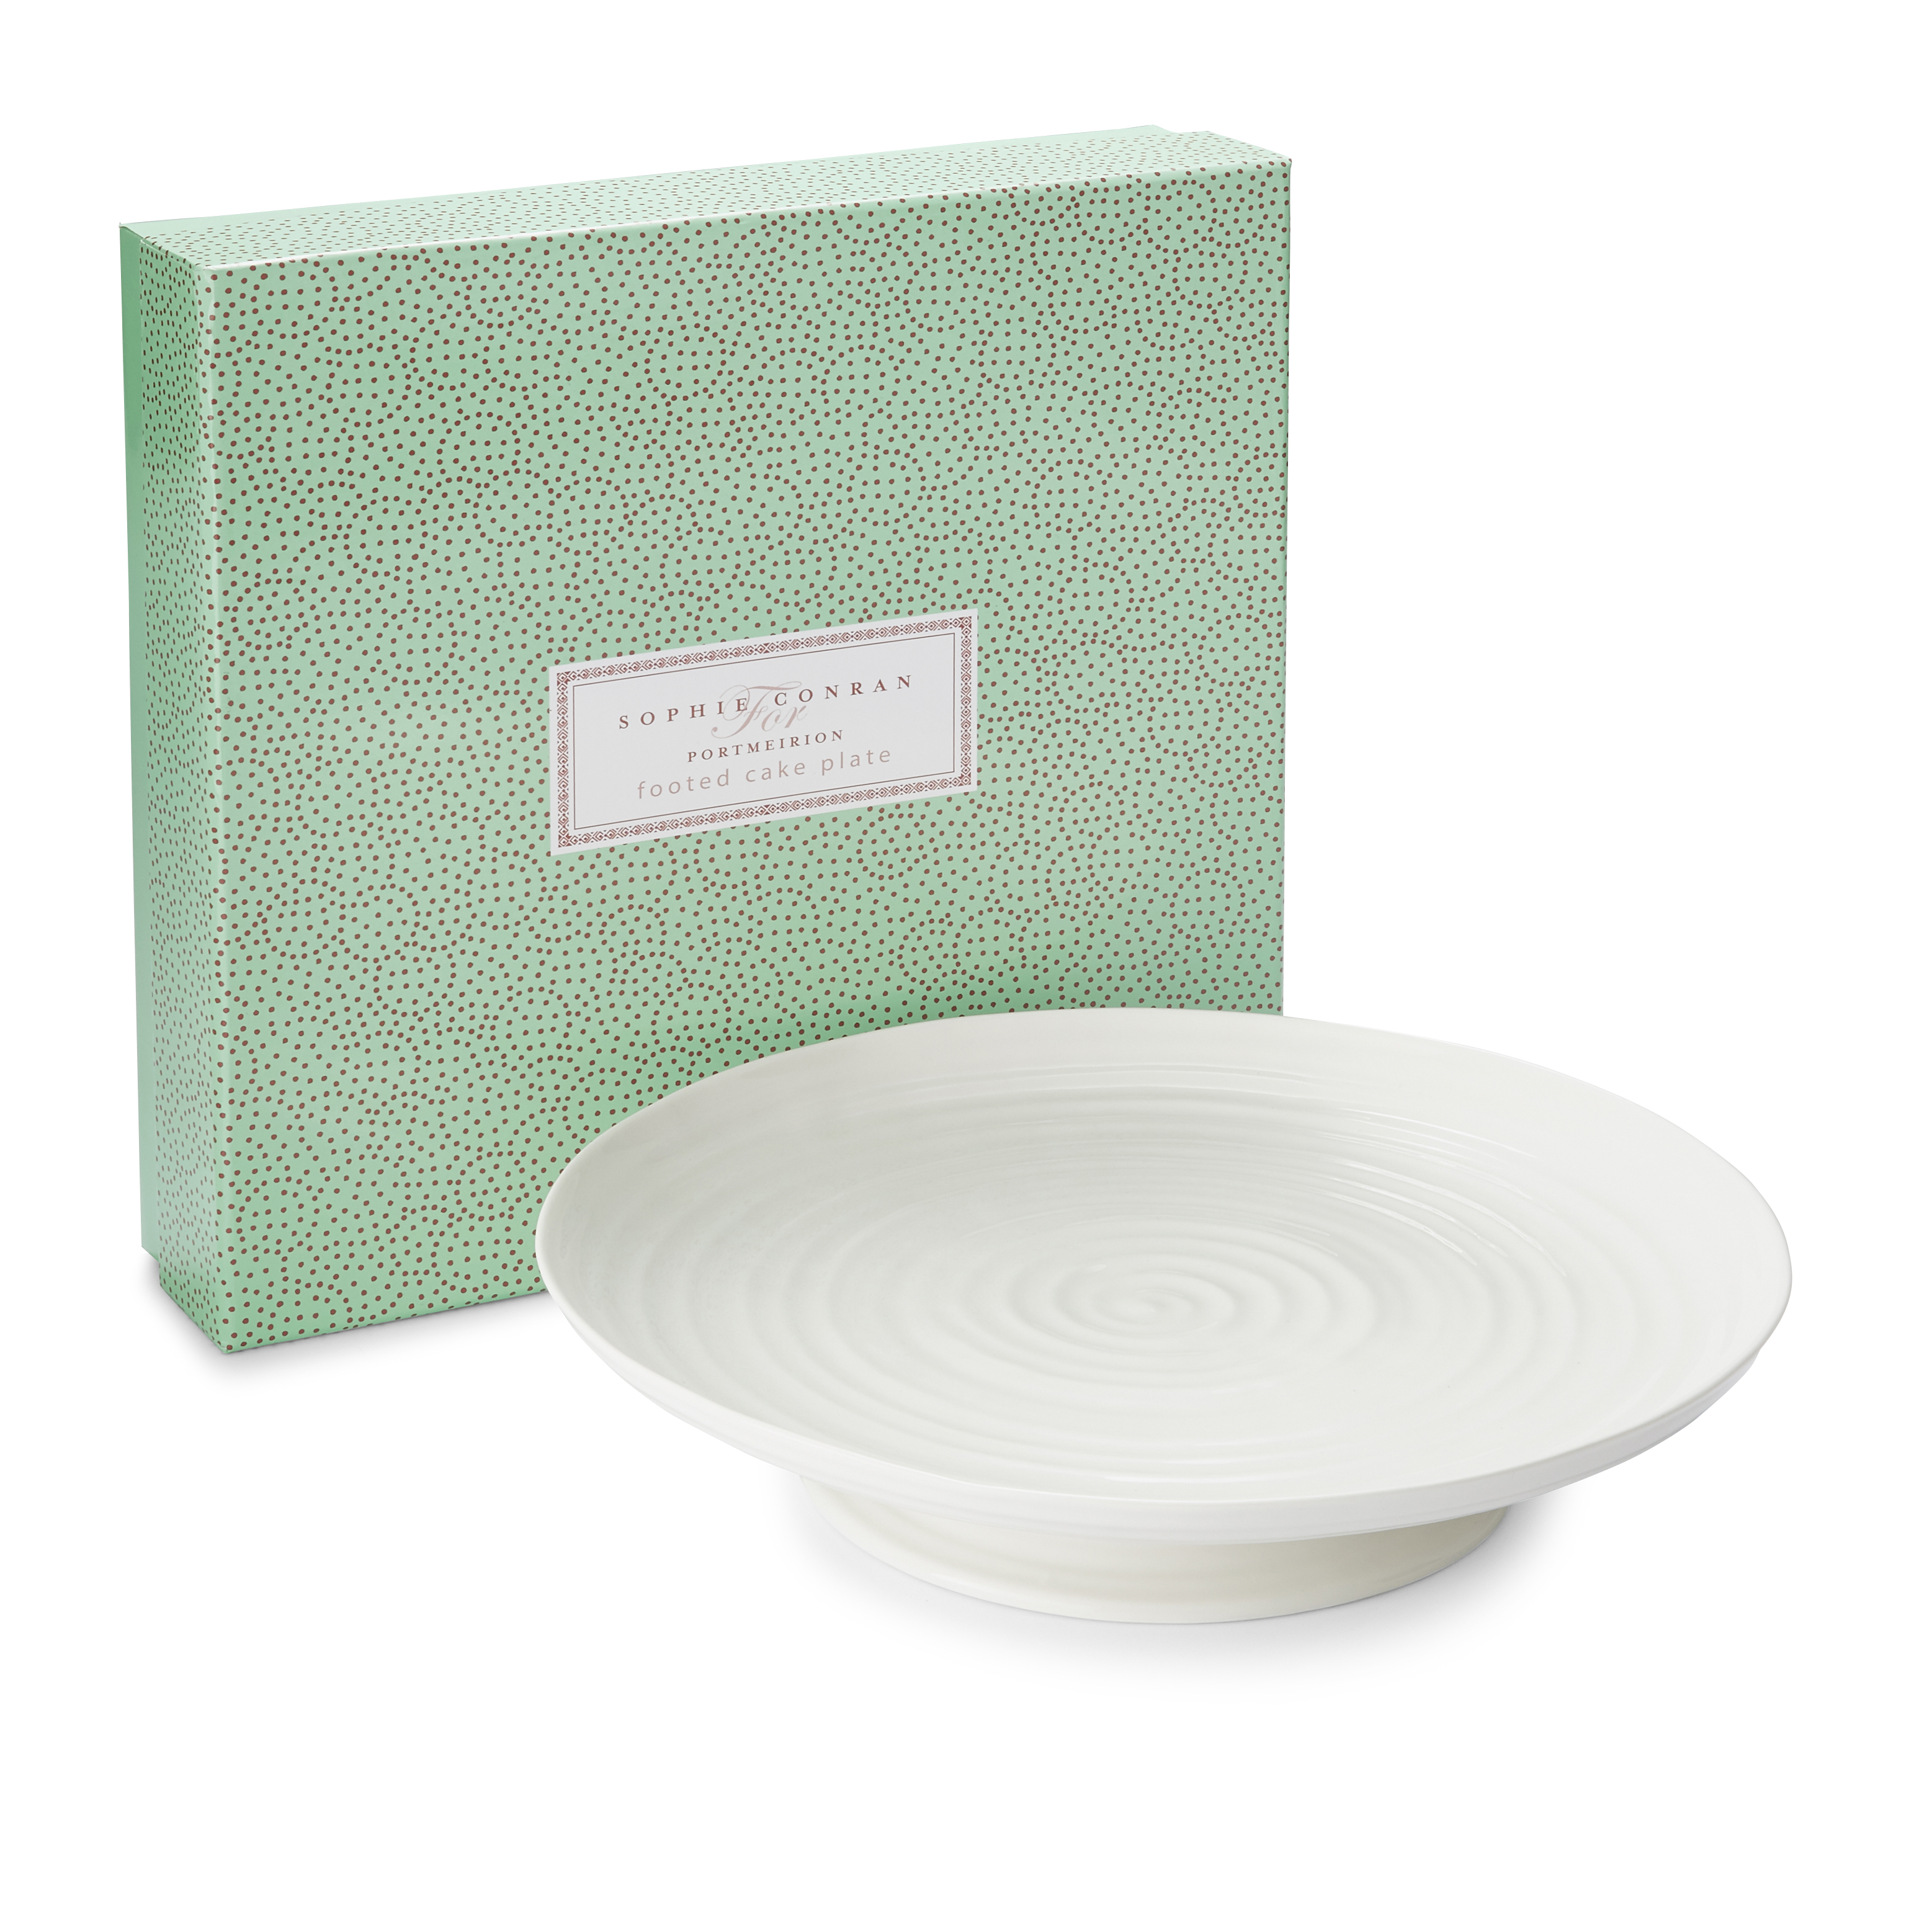 Sophie Conran Cake Stand, White image number null